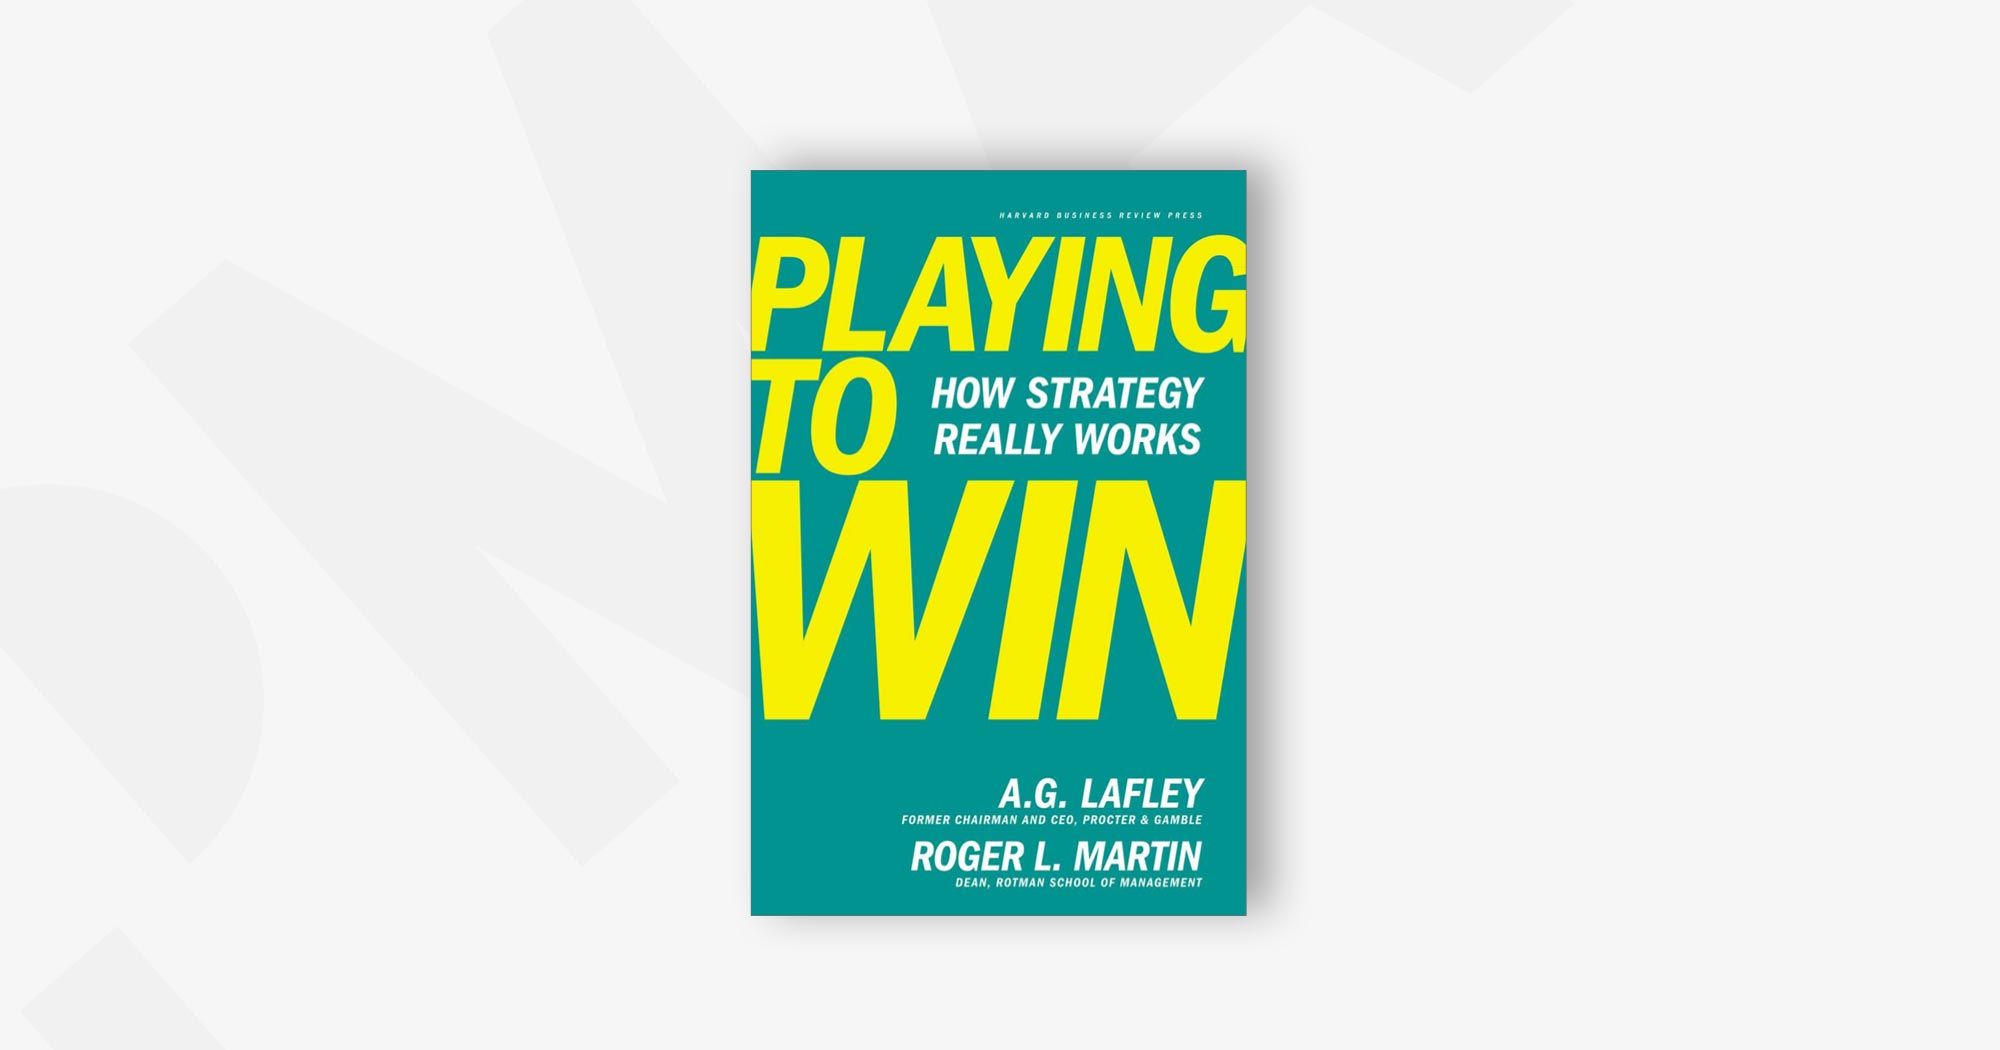 Playing to Win: How Strategy Really Works – A.G. Lafley and Roger L. Martin